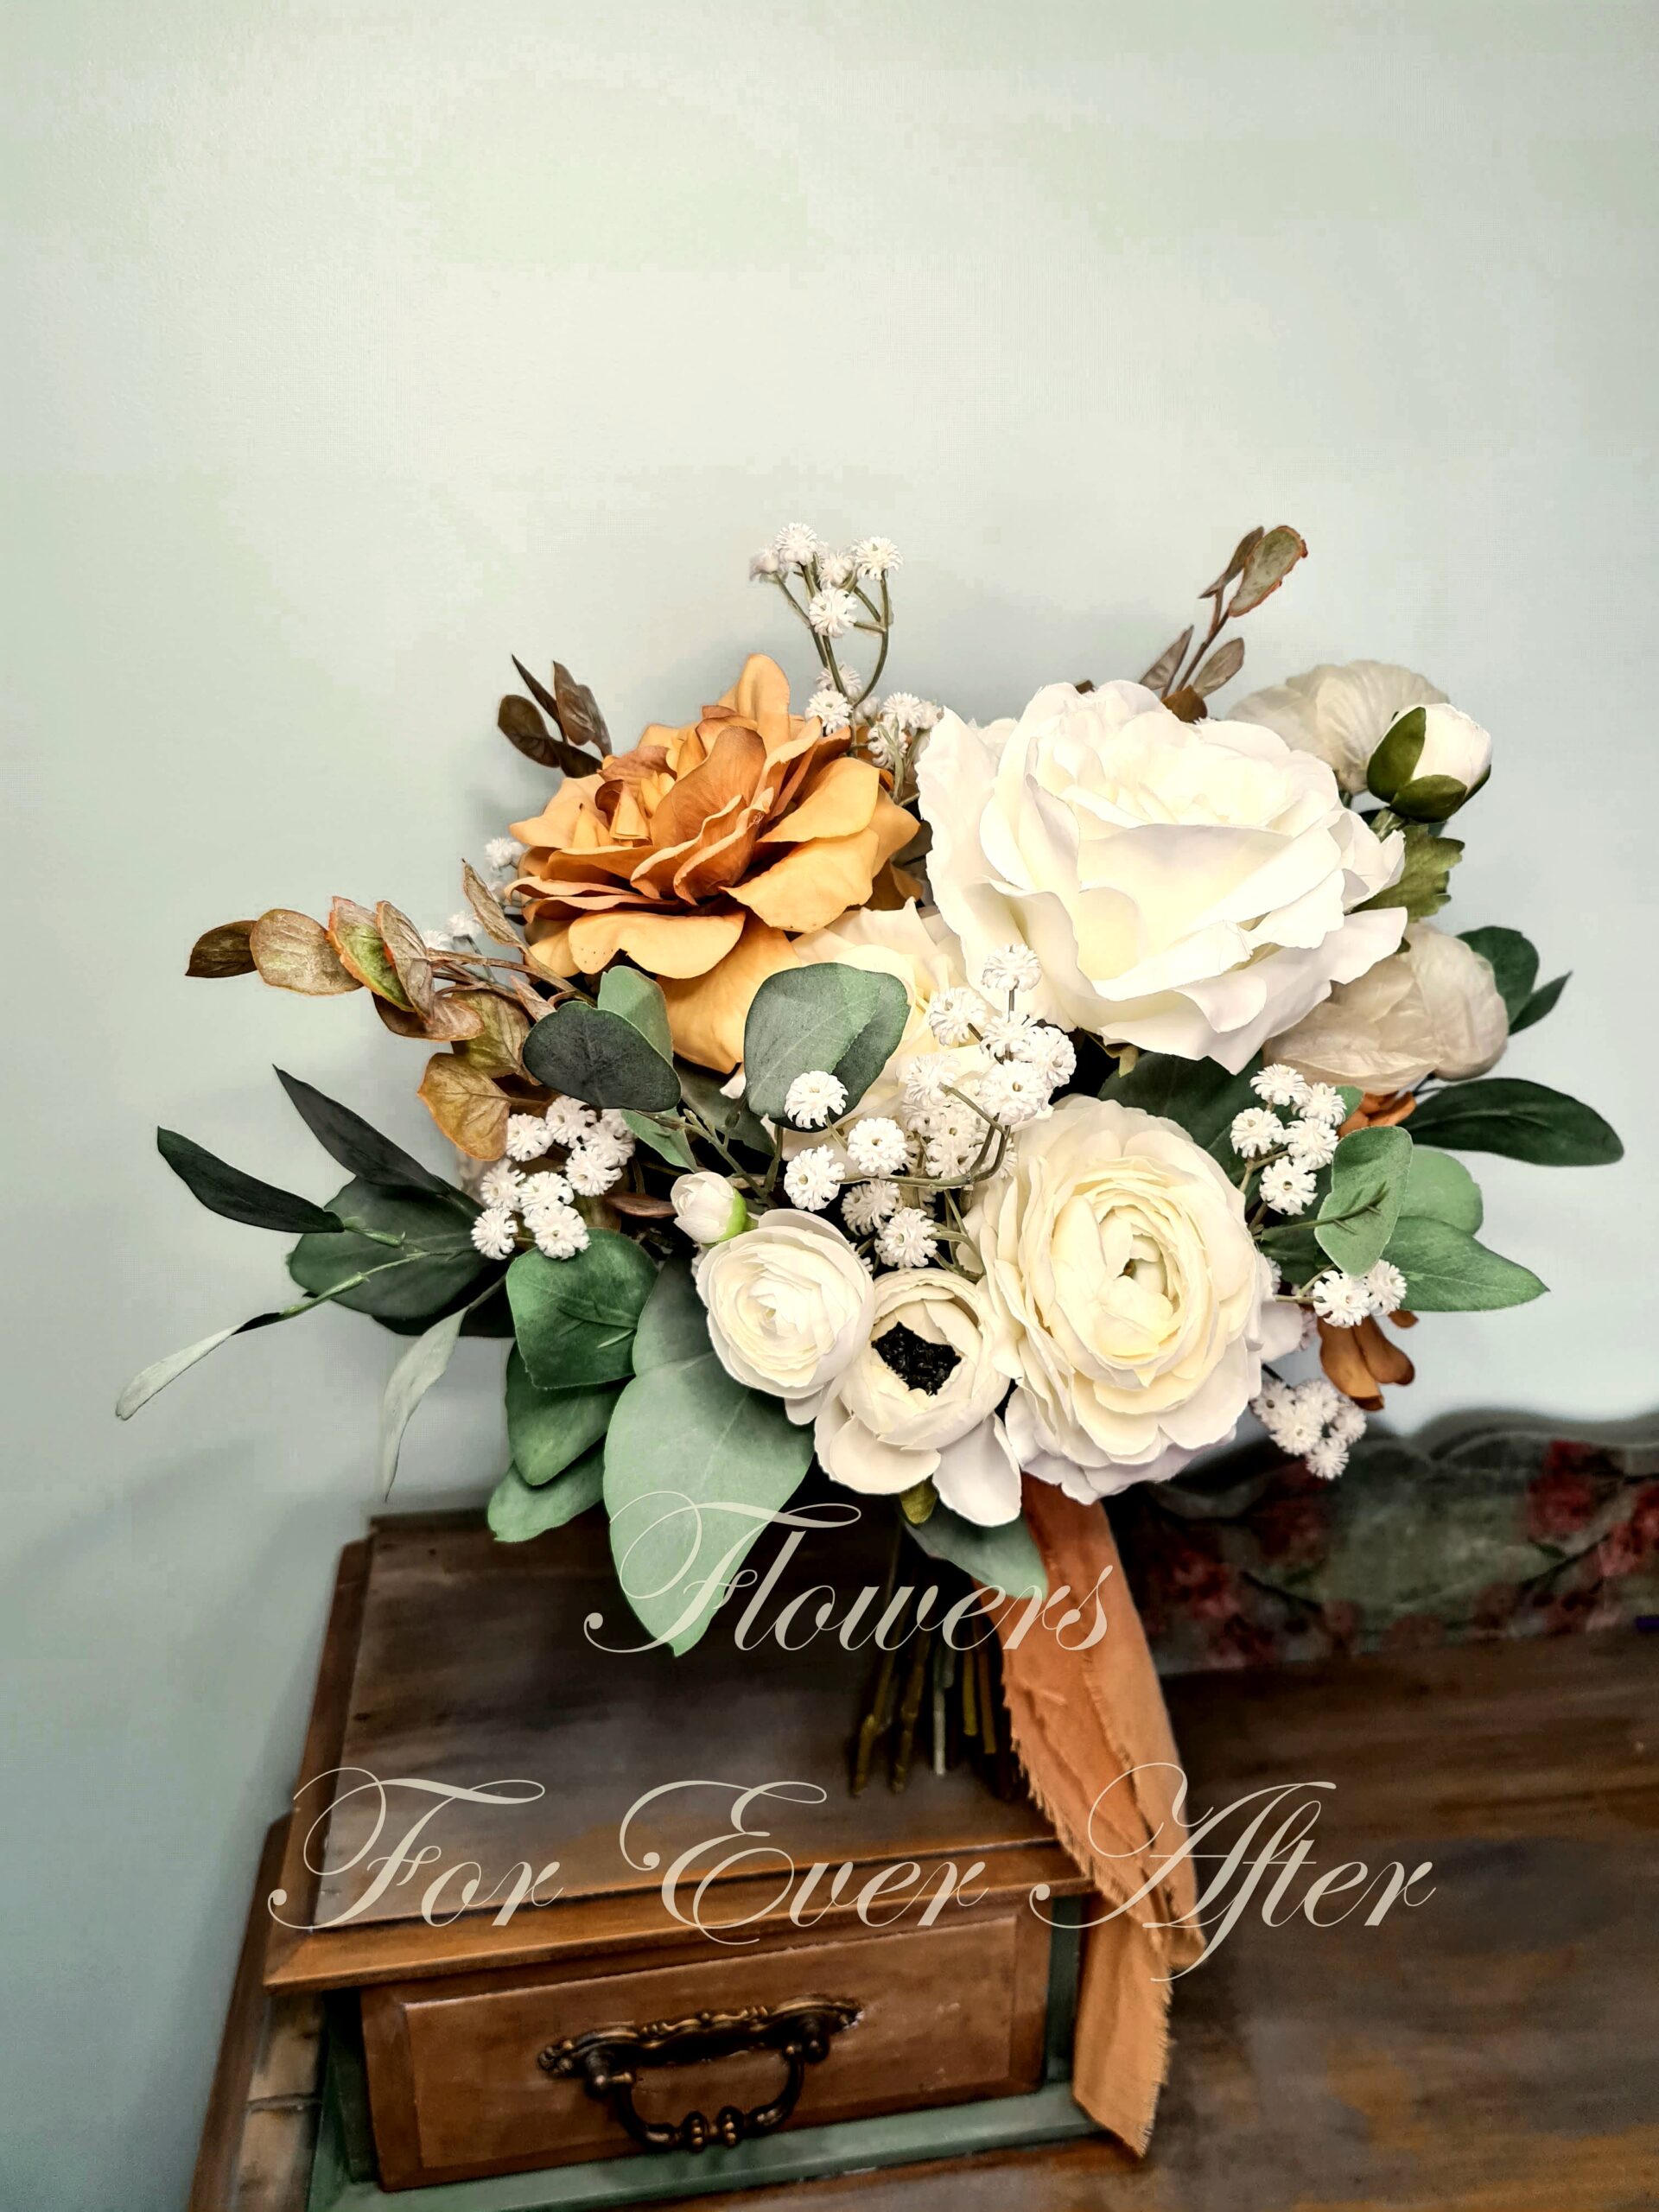 Artificial wedding flowers and silk bridal bouquets made in Melbourne Australia by Flowers For Ever After. Buy Bouquets, Boutonnieres, corsages, arbour flowers, cake toppers and more online now. Worldwide shipping available.